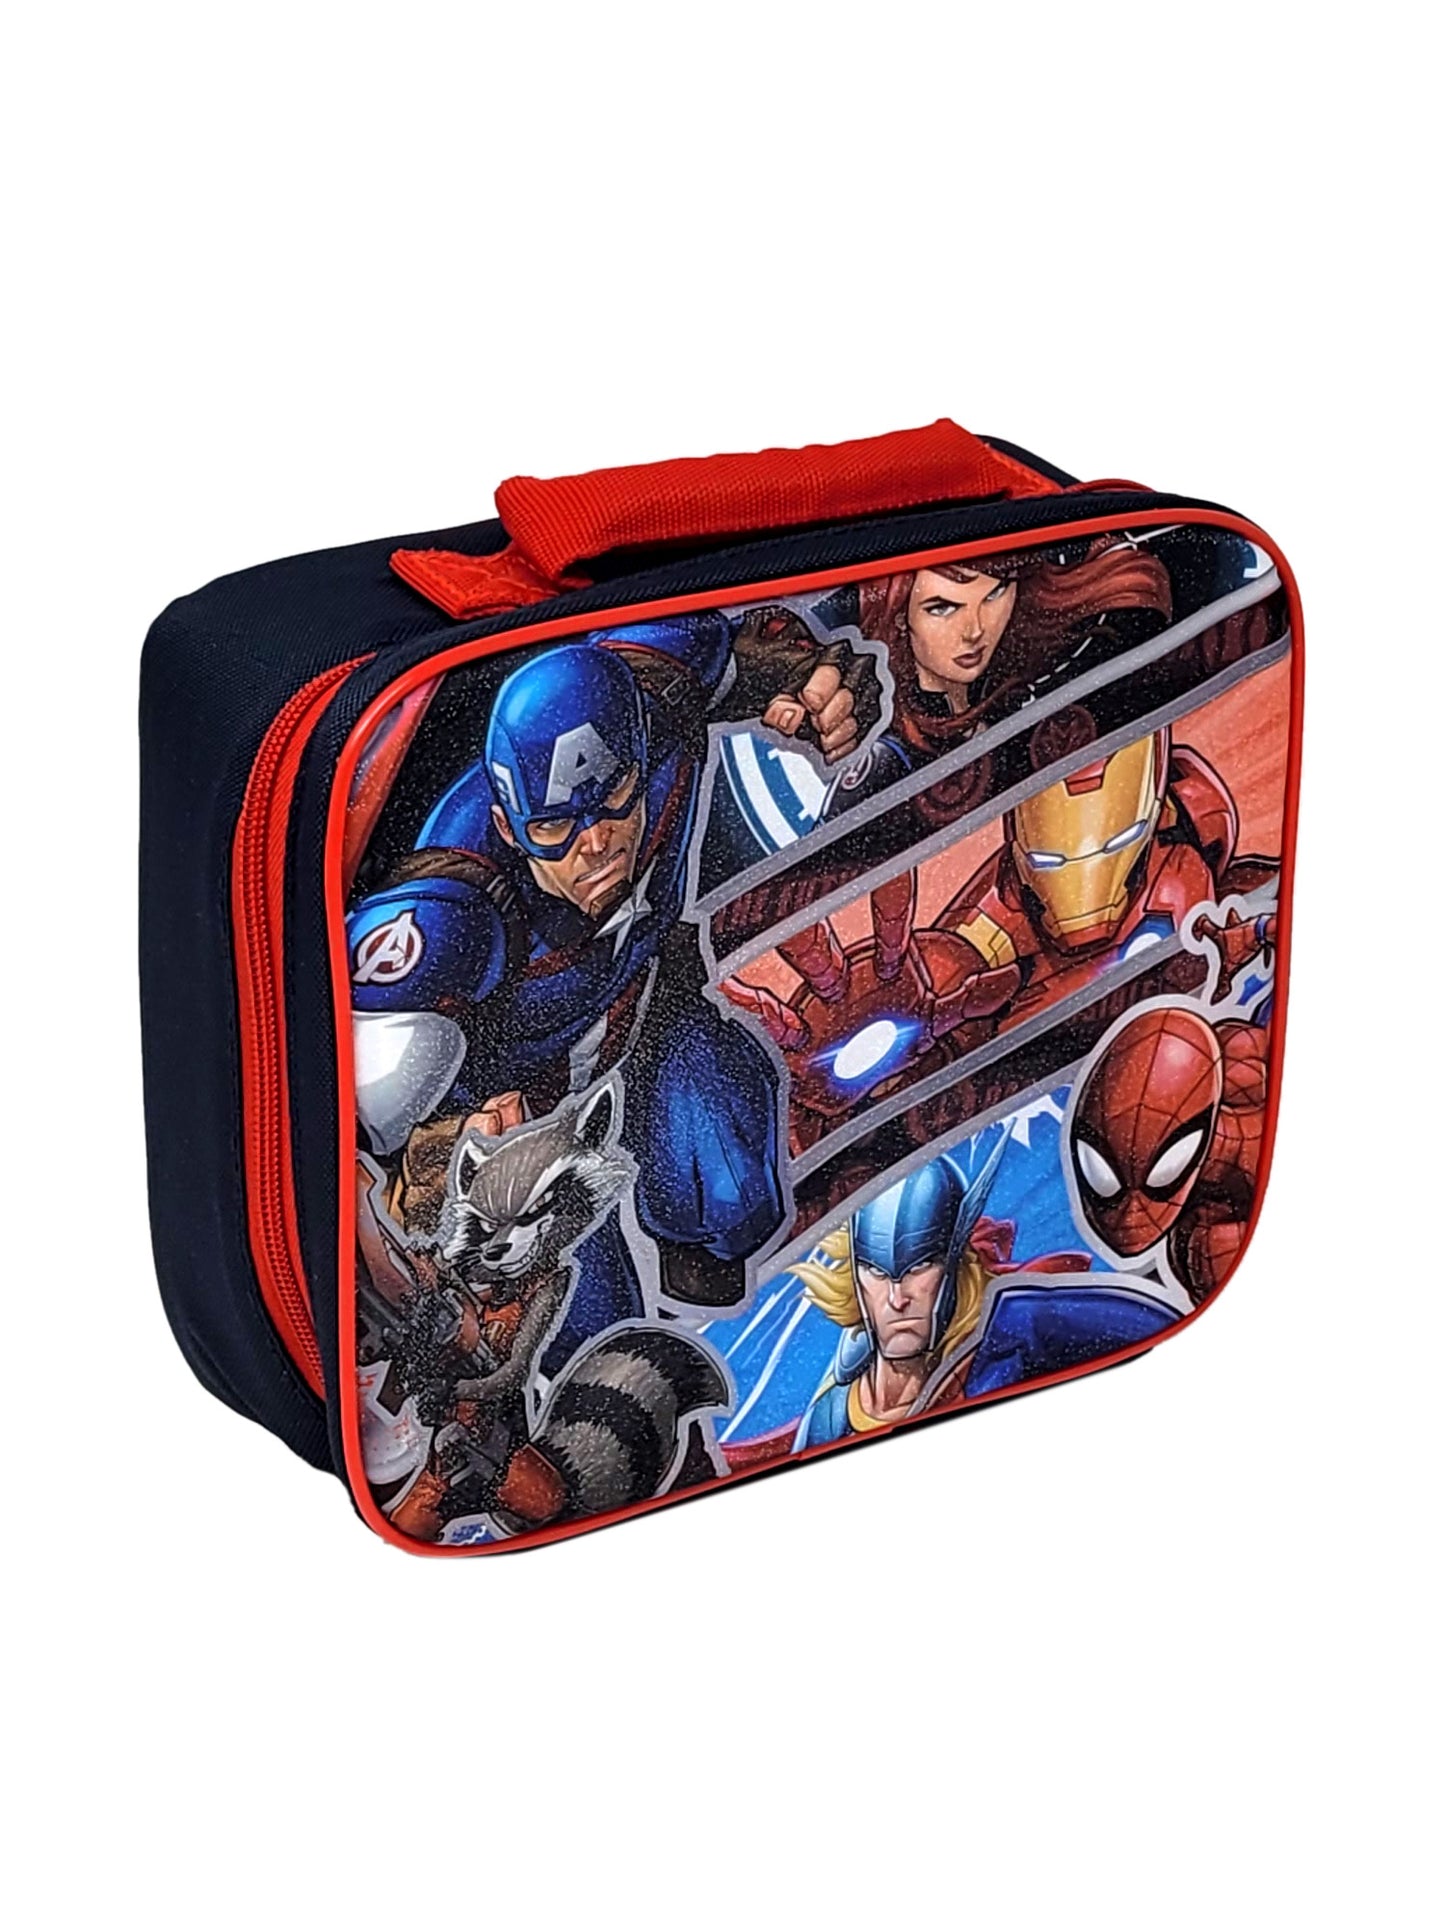 Marvel Avengers Spider-Man Lunch Bag Insulated & Snack Container Lunch Set Boys